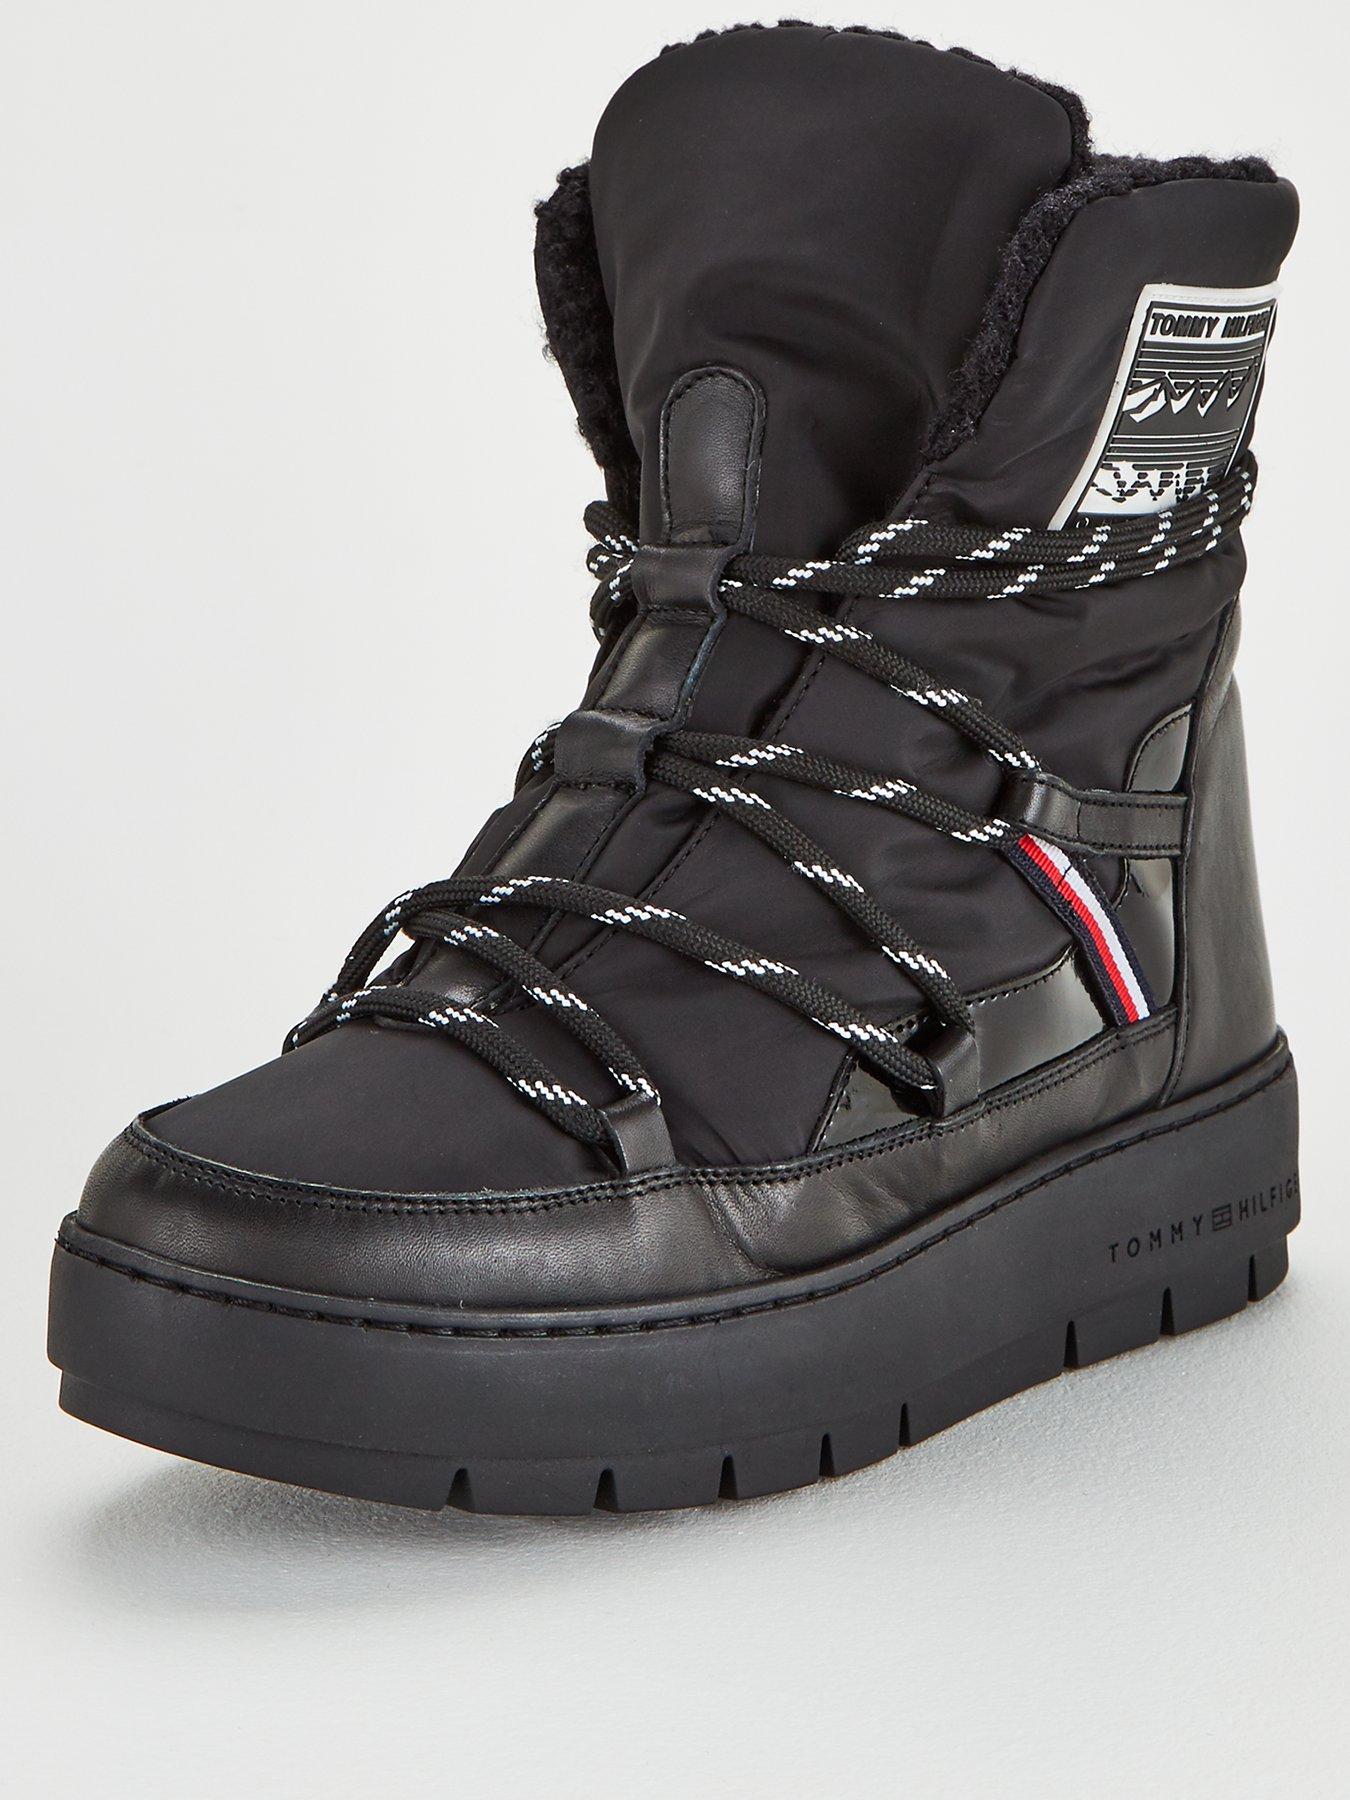 tommy hilfiger winter boot